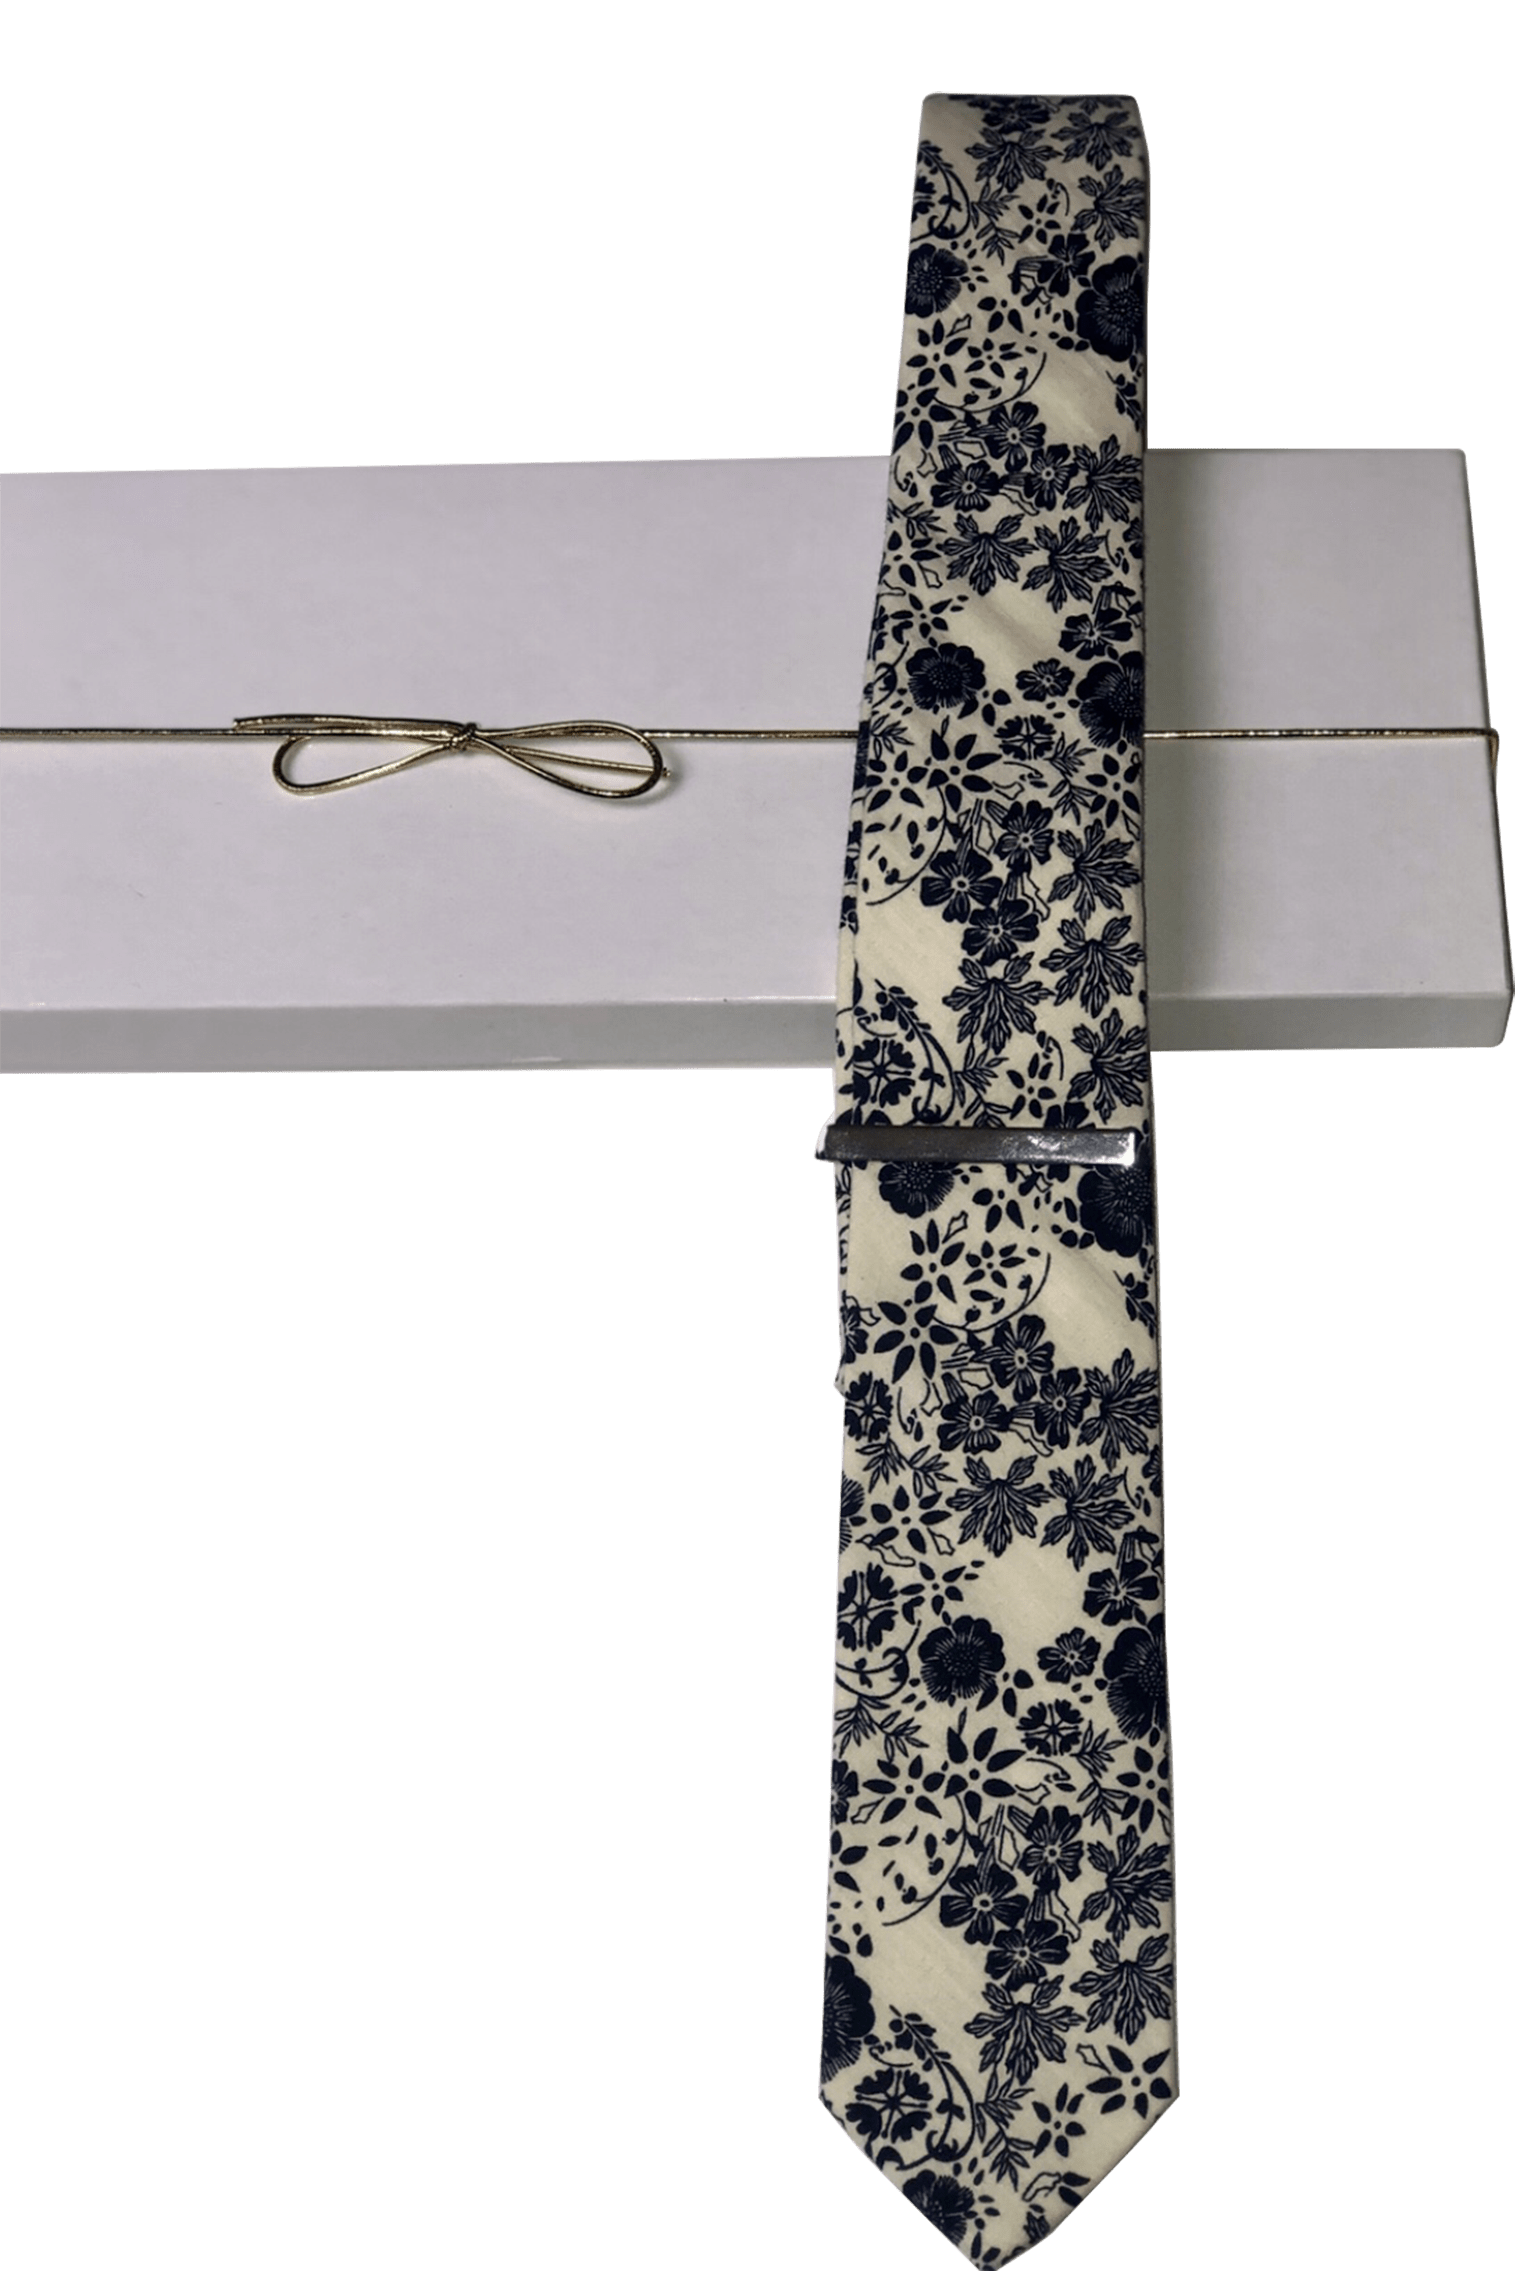 AG- variety brands and styles luxury Ties in gift boxes